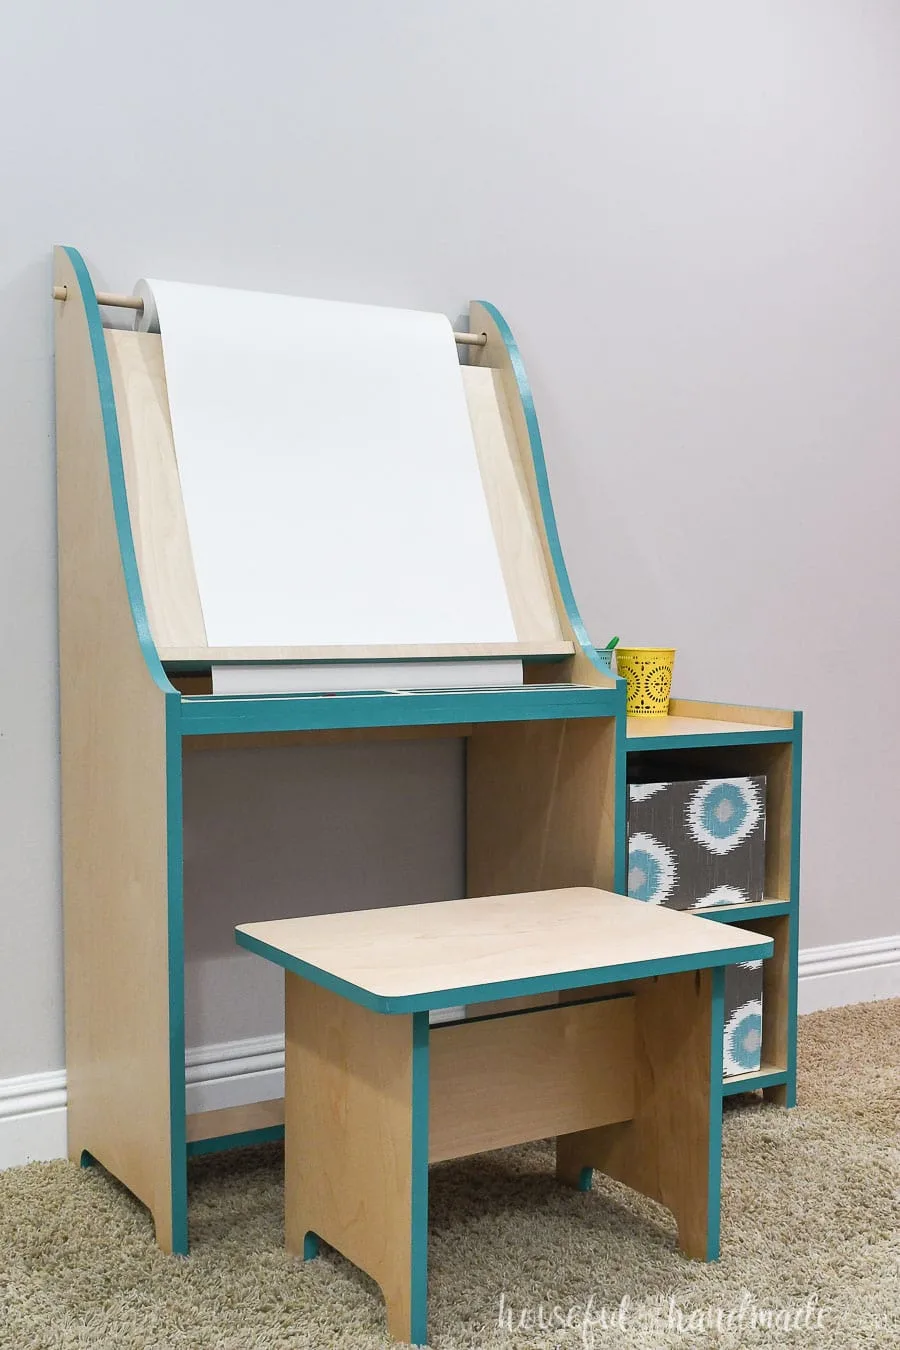 Kids art easel made from wood with shelves on the side and matching bench. 